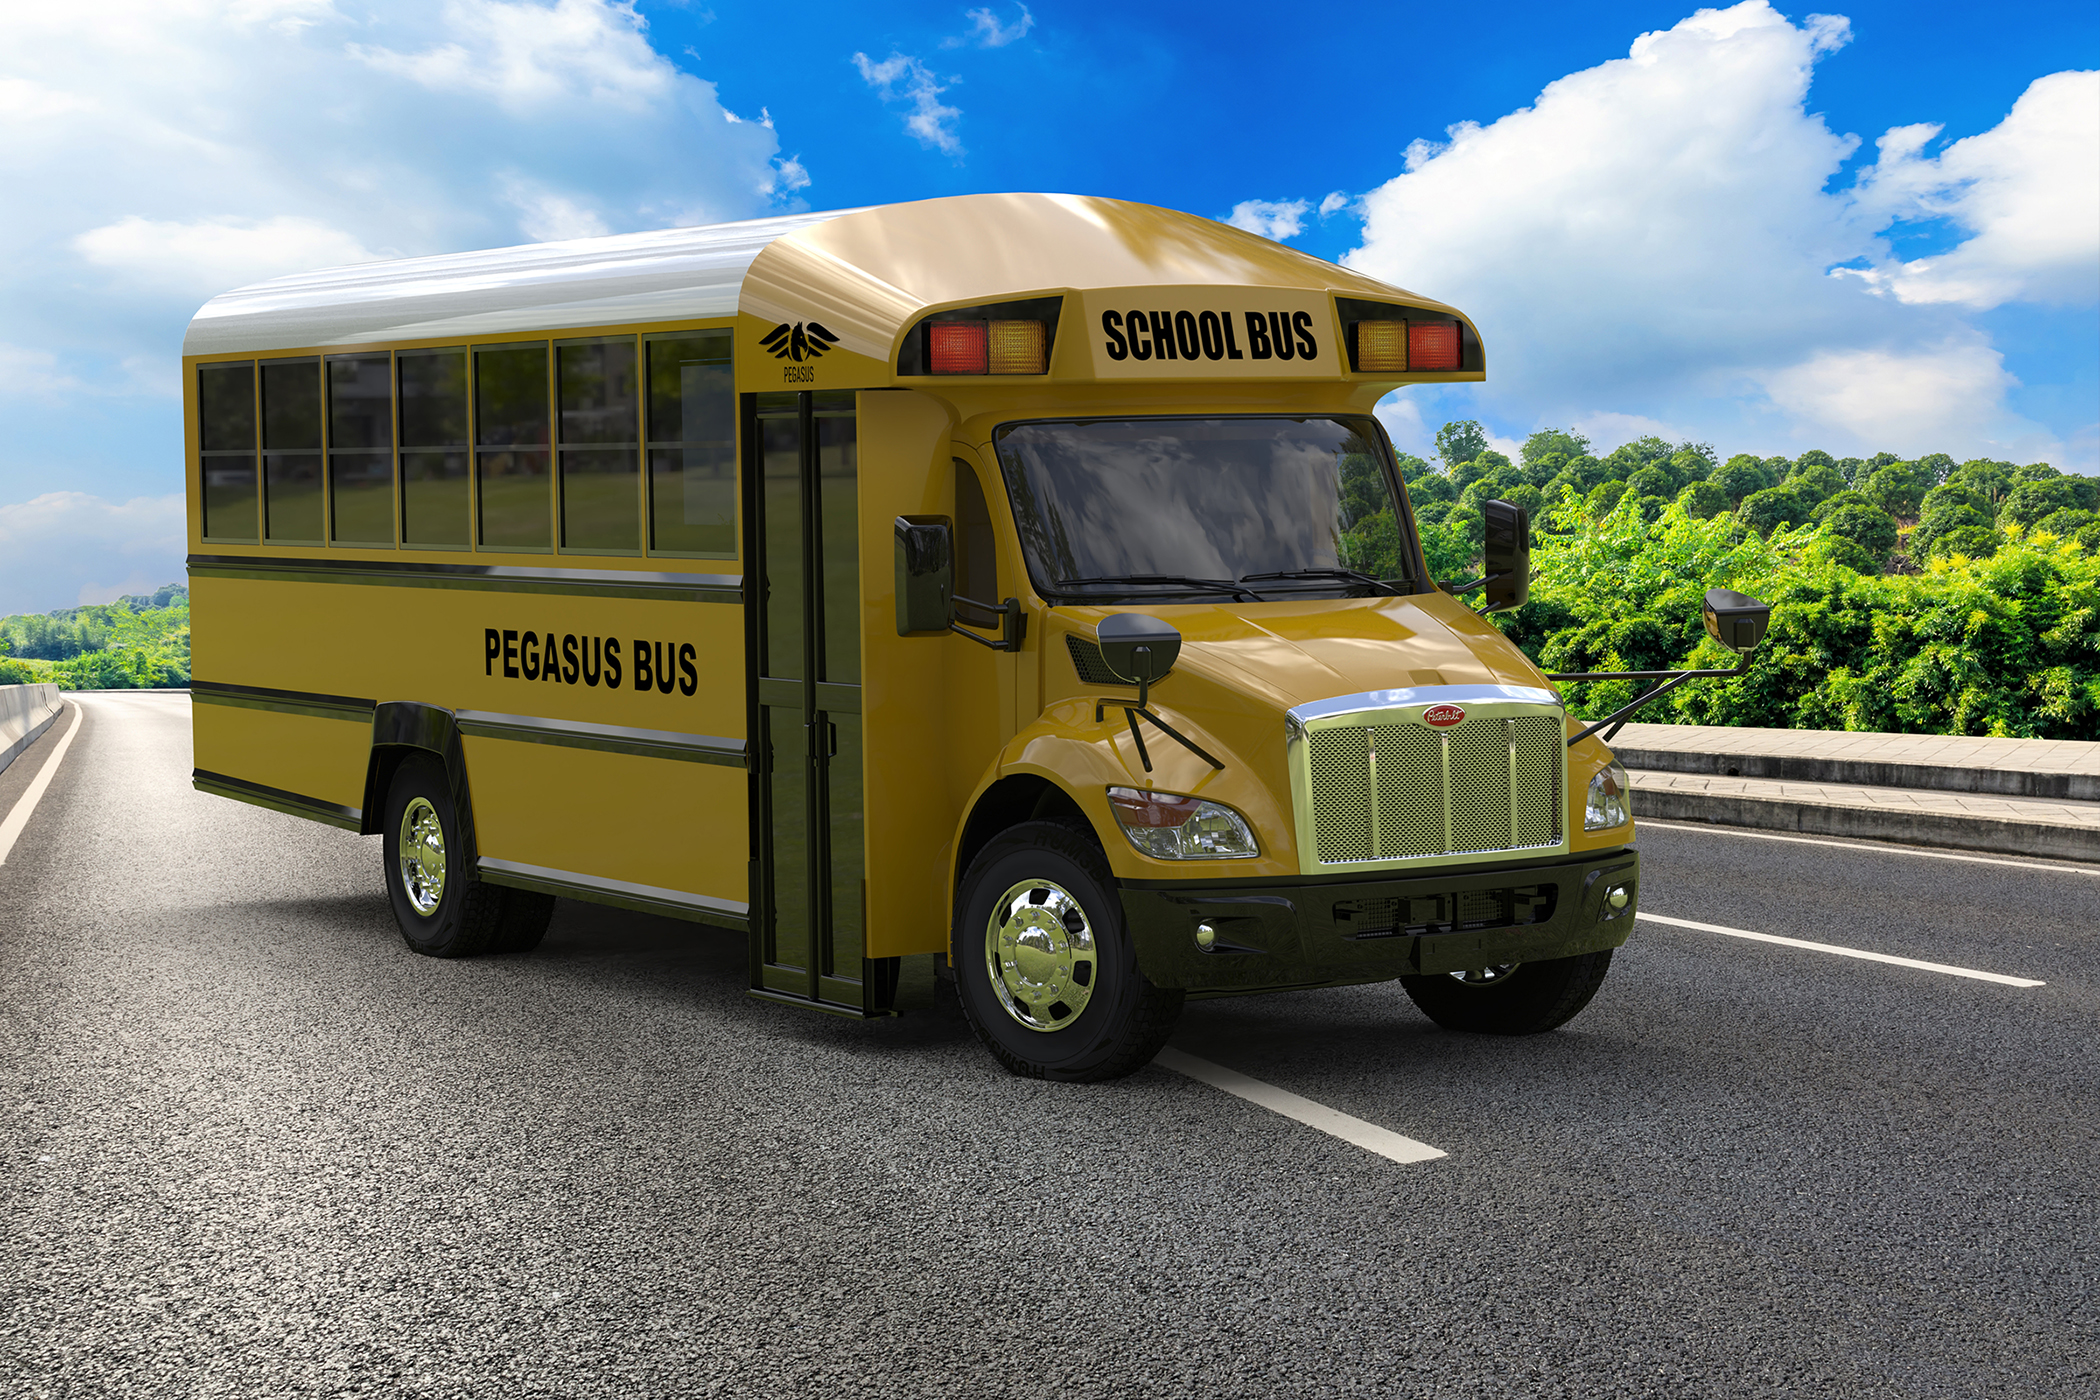 Pegasus does business in the U.S. and Canada and will introduce the first Pegasus Type C school bus, which is expected in November 2022.